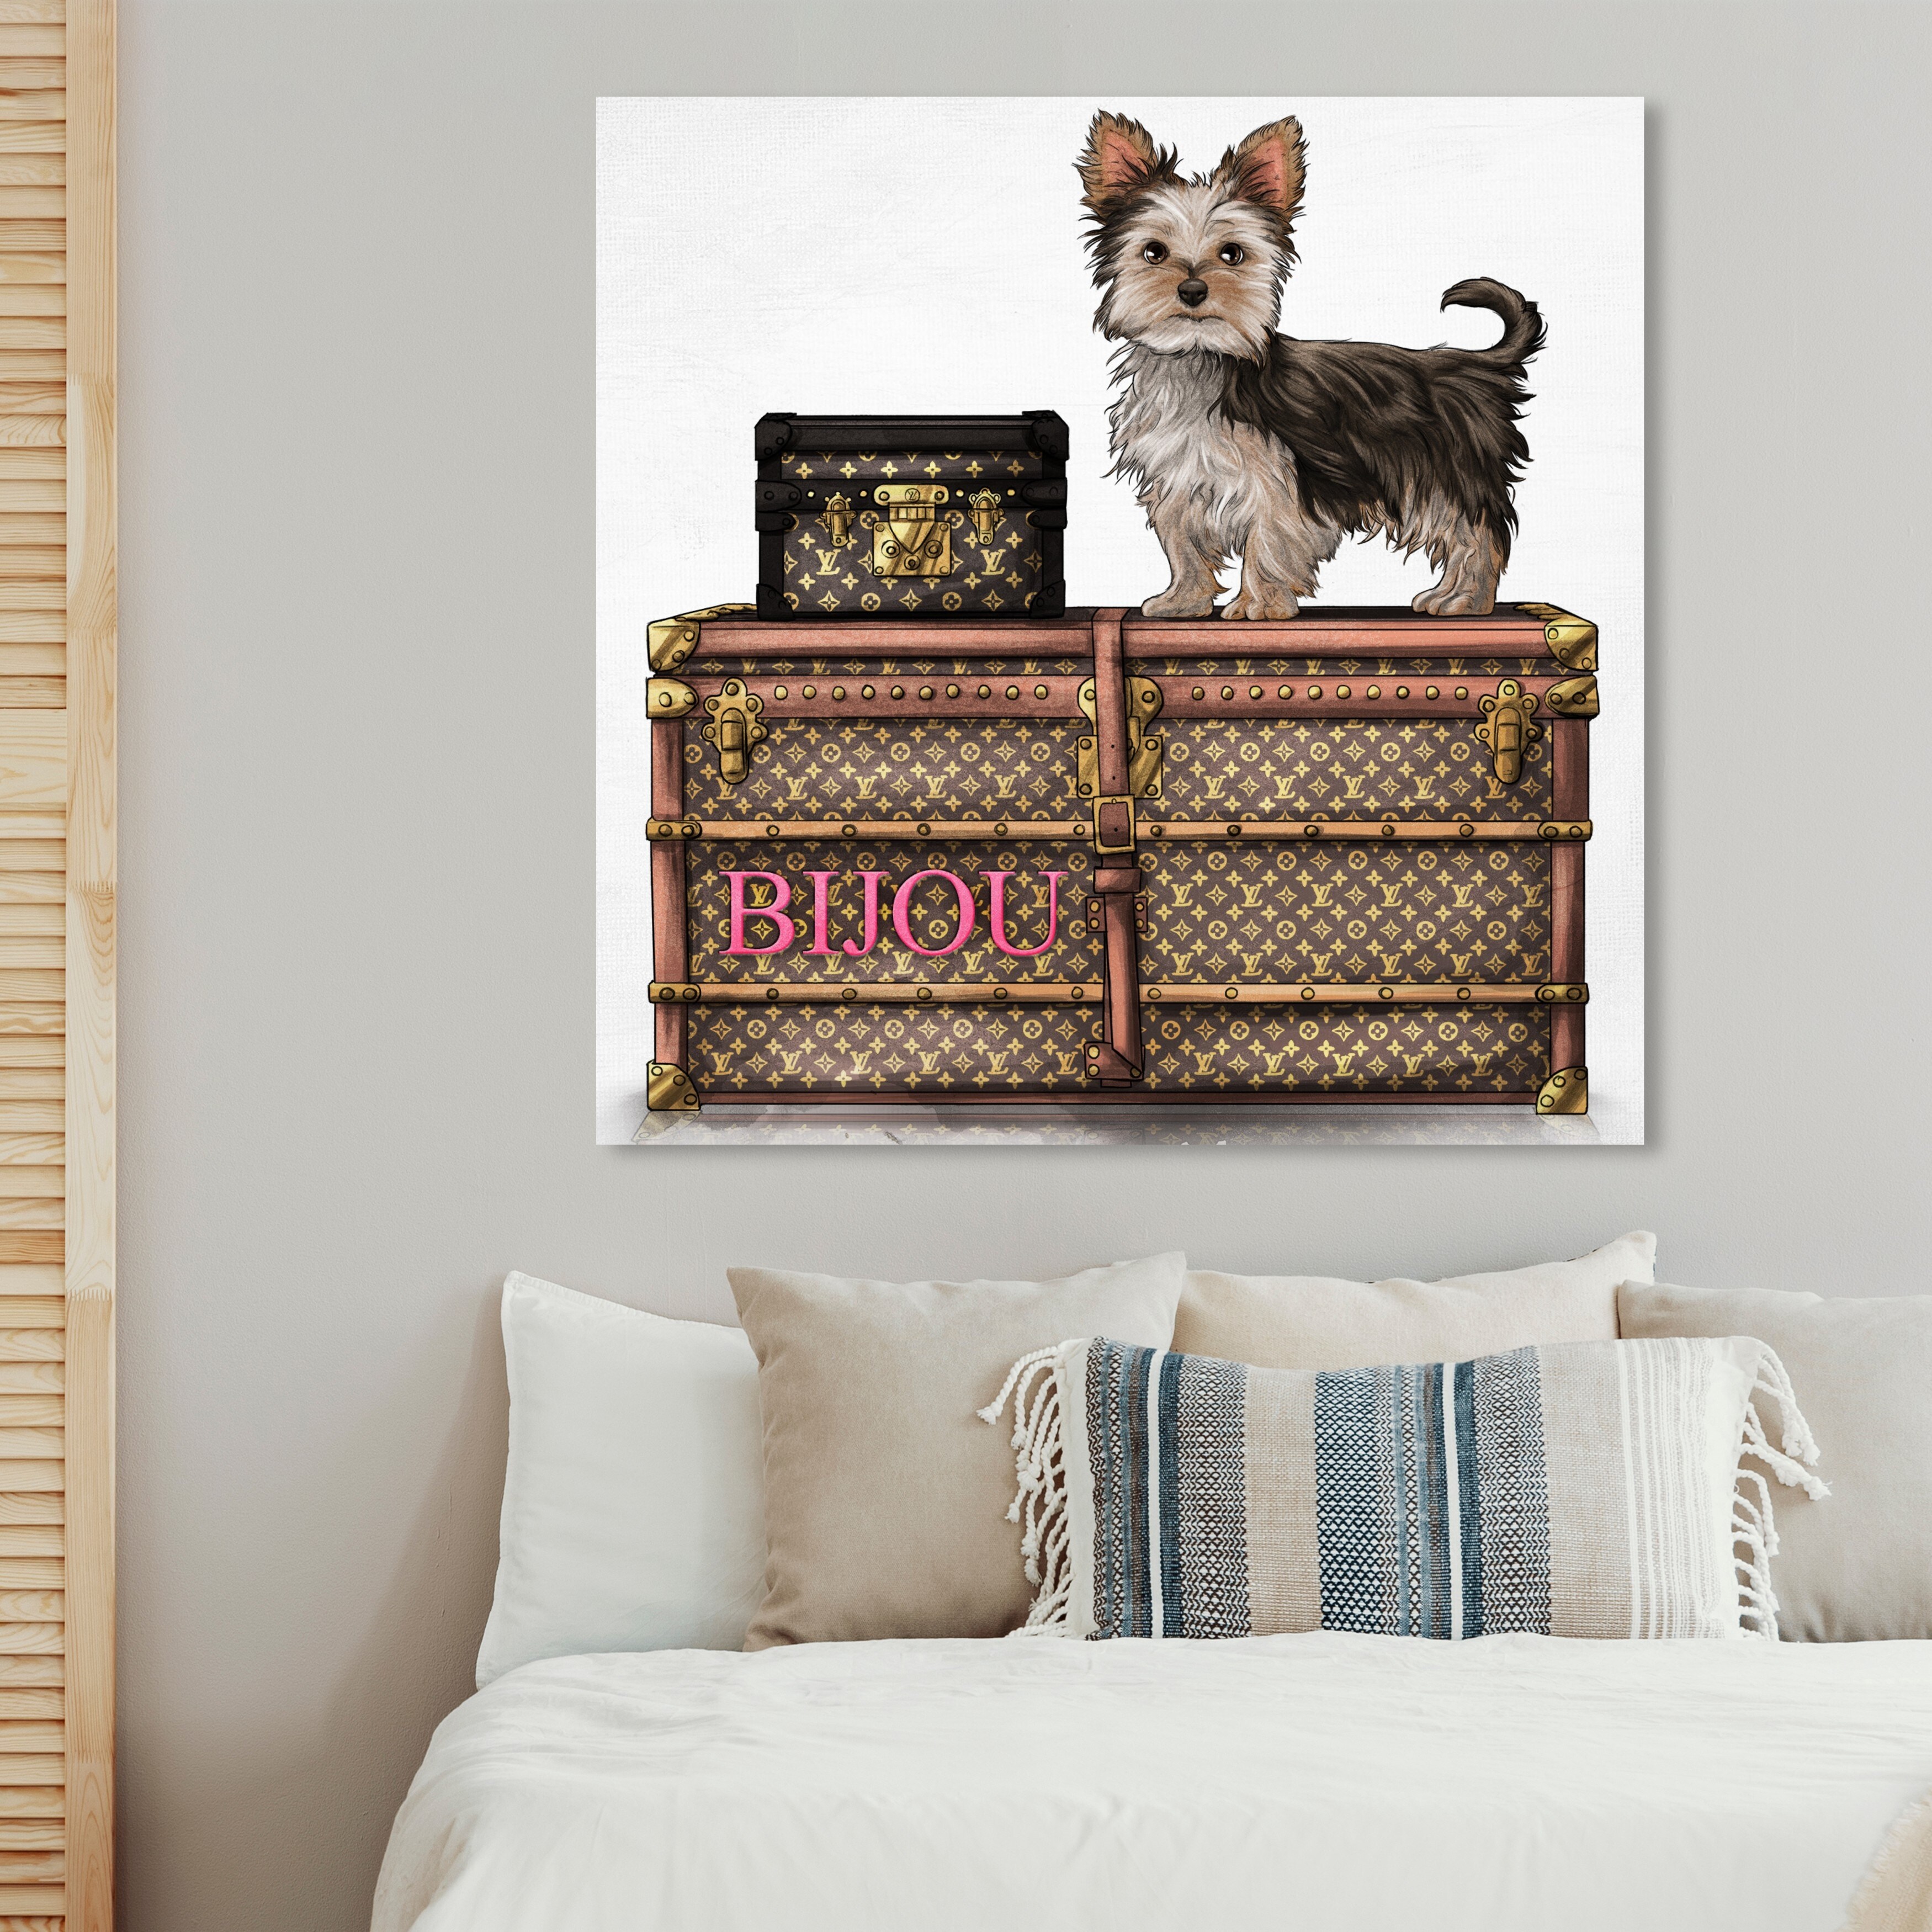 Oliver Gal Fashion and Glam Wall Art Canvas Prints 'Bijou Trunk' Travel  Essentials - Brown, White - On Sale - Bed Bath & Beyond - 30765267